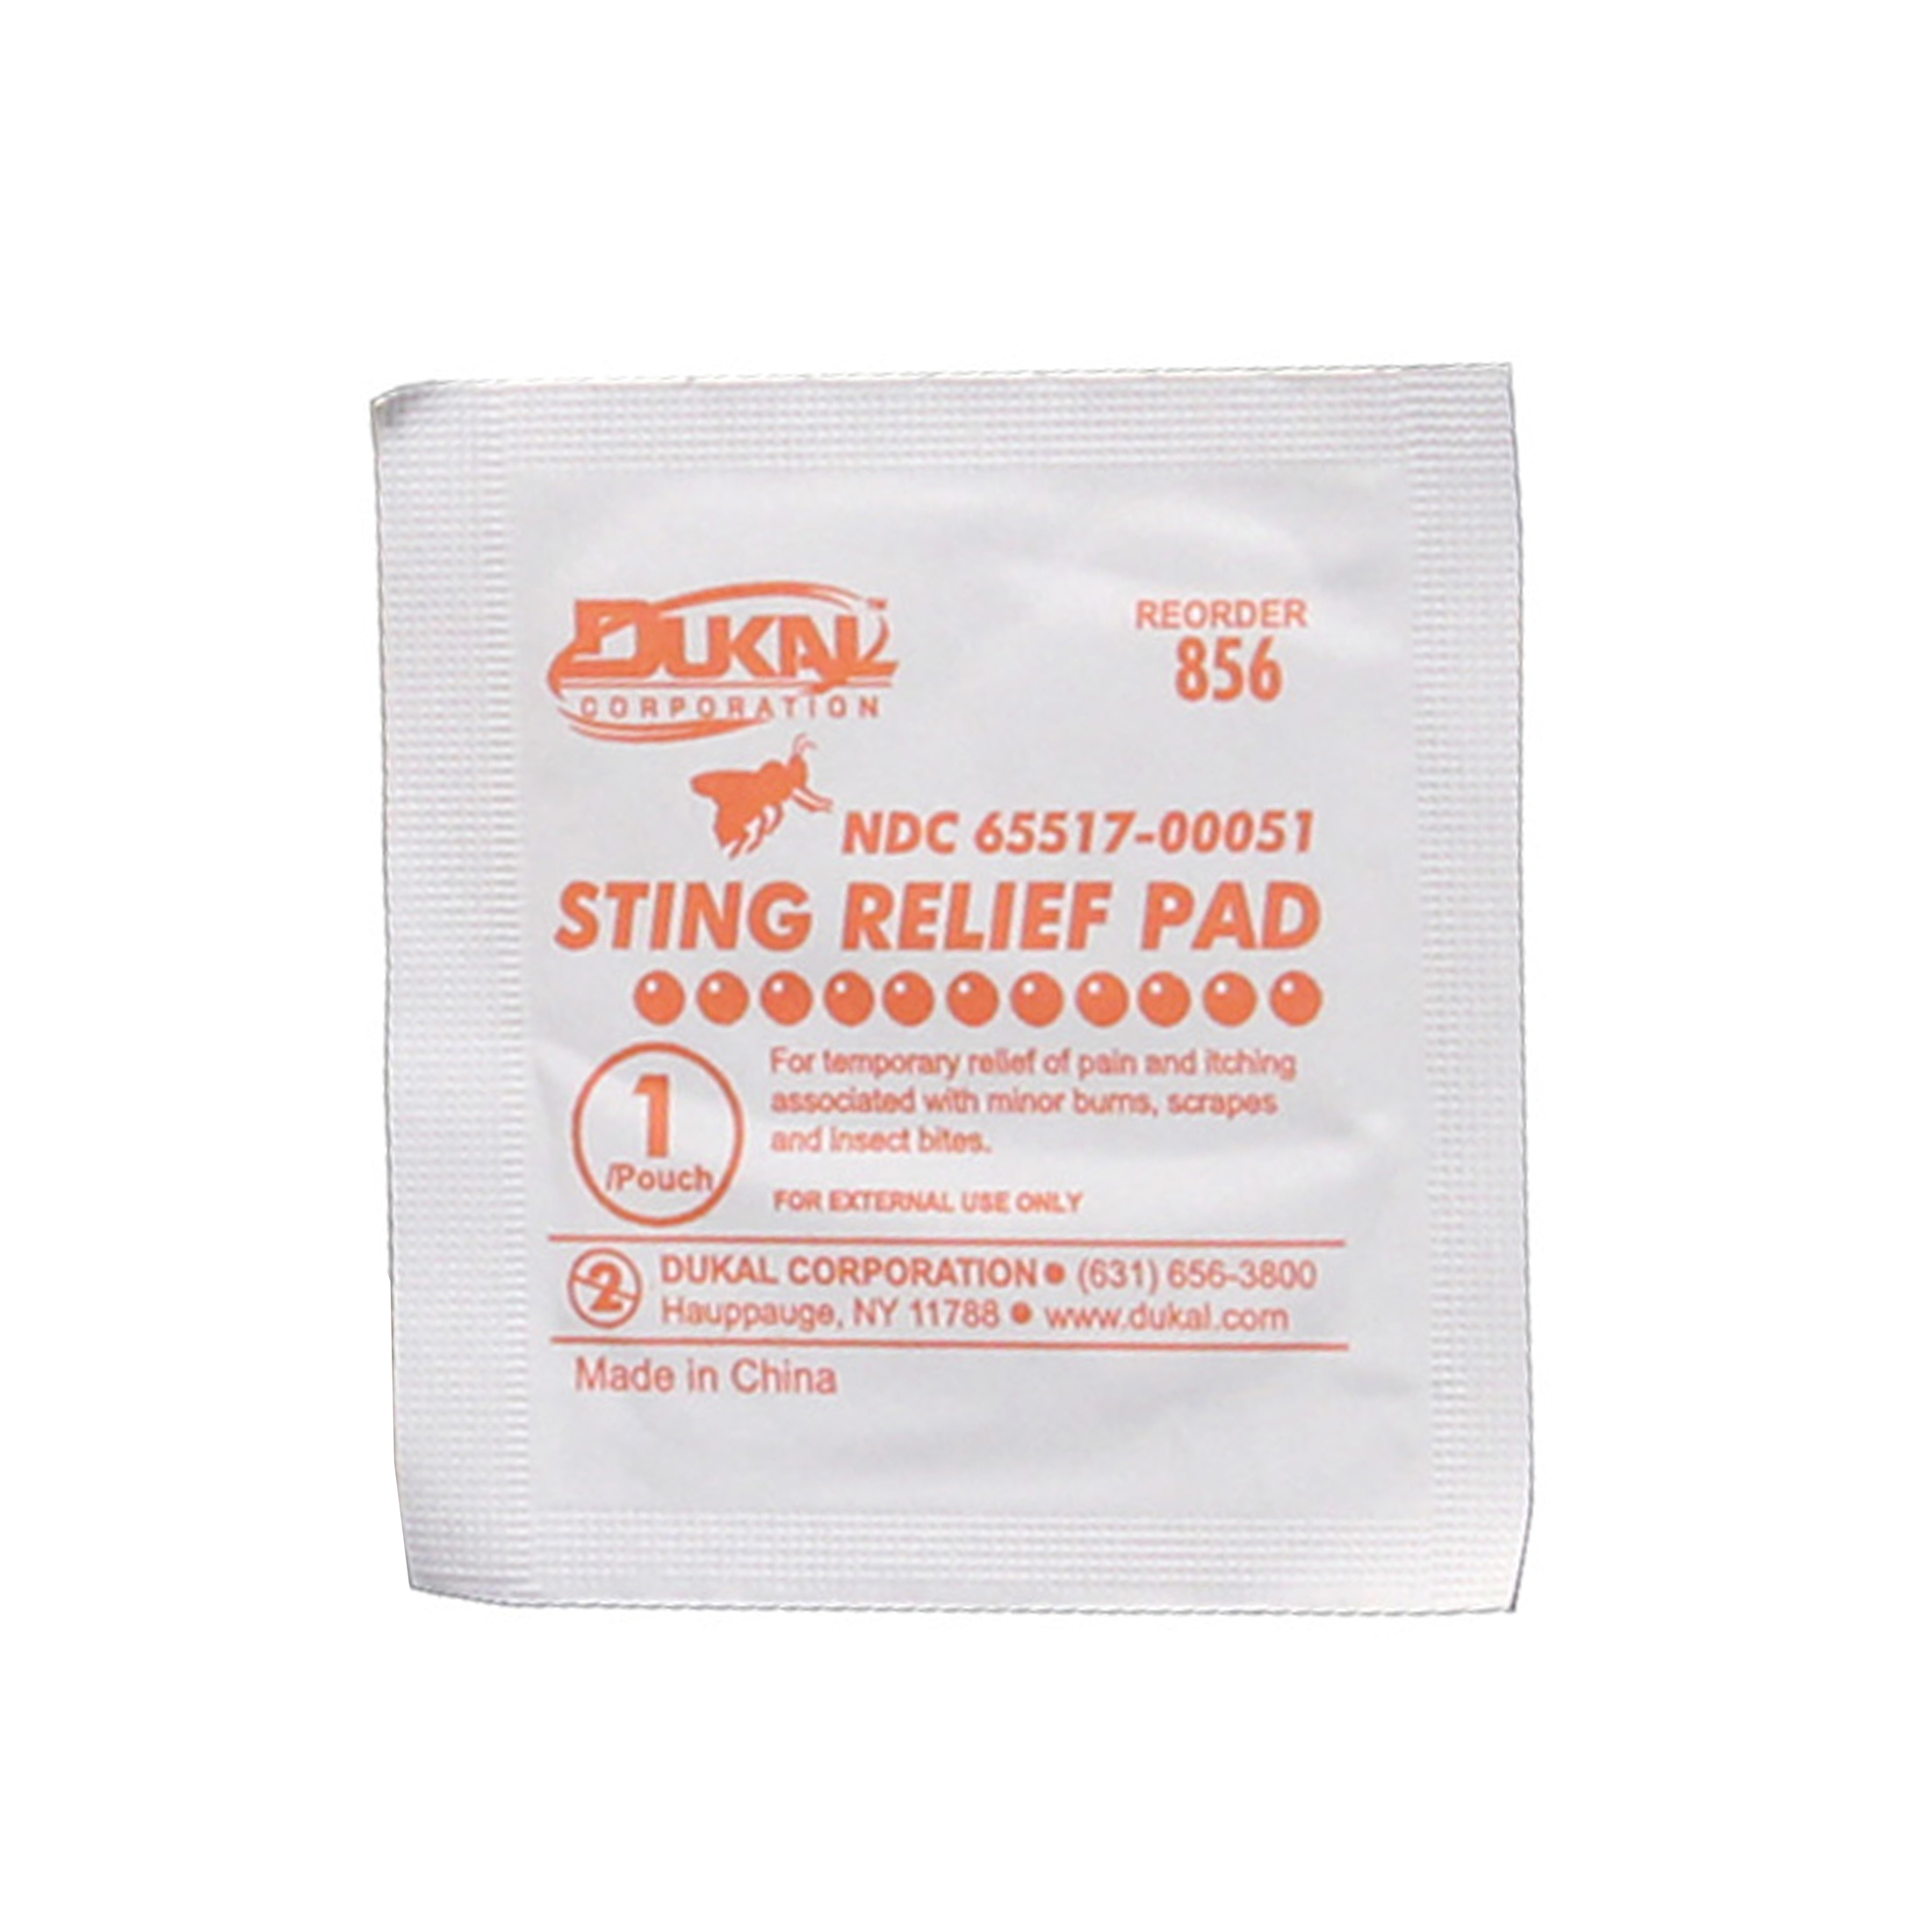 Sting & Pain Relief Pads Products, Supplies and Equipment